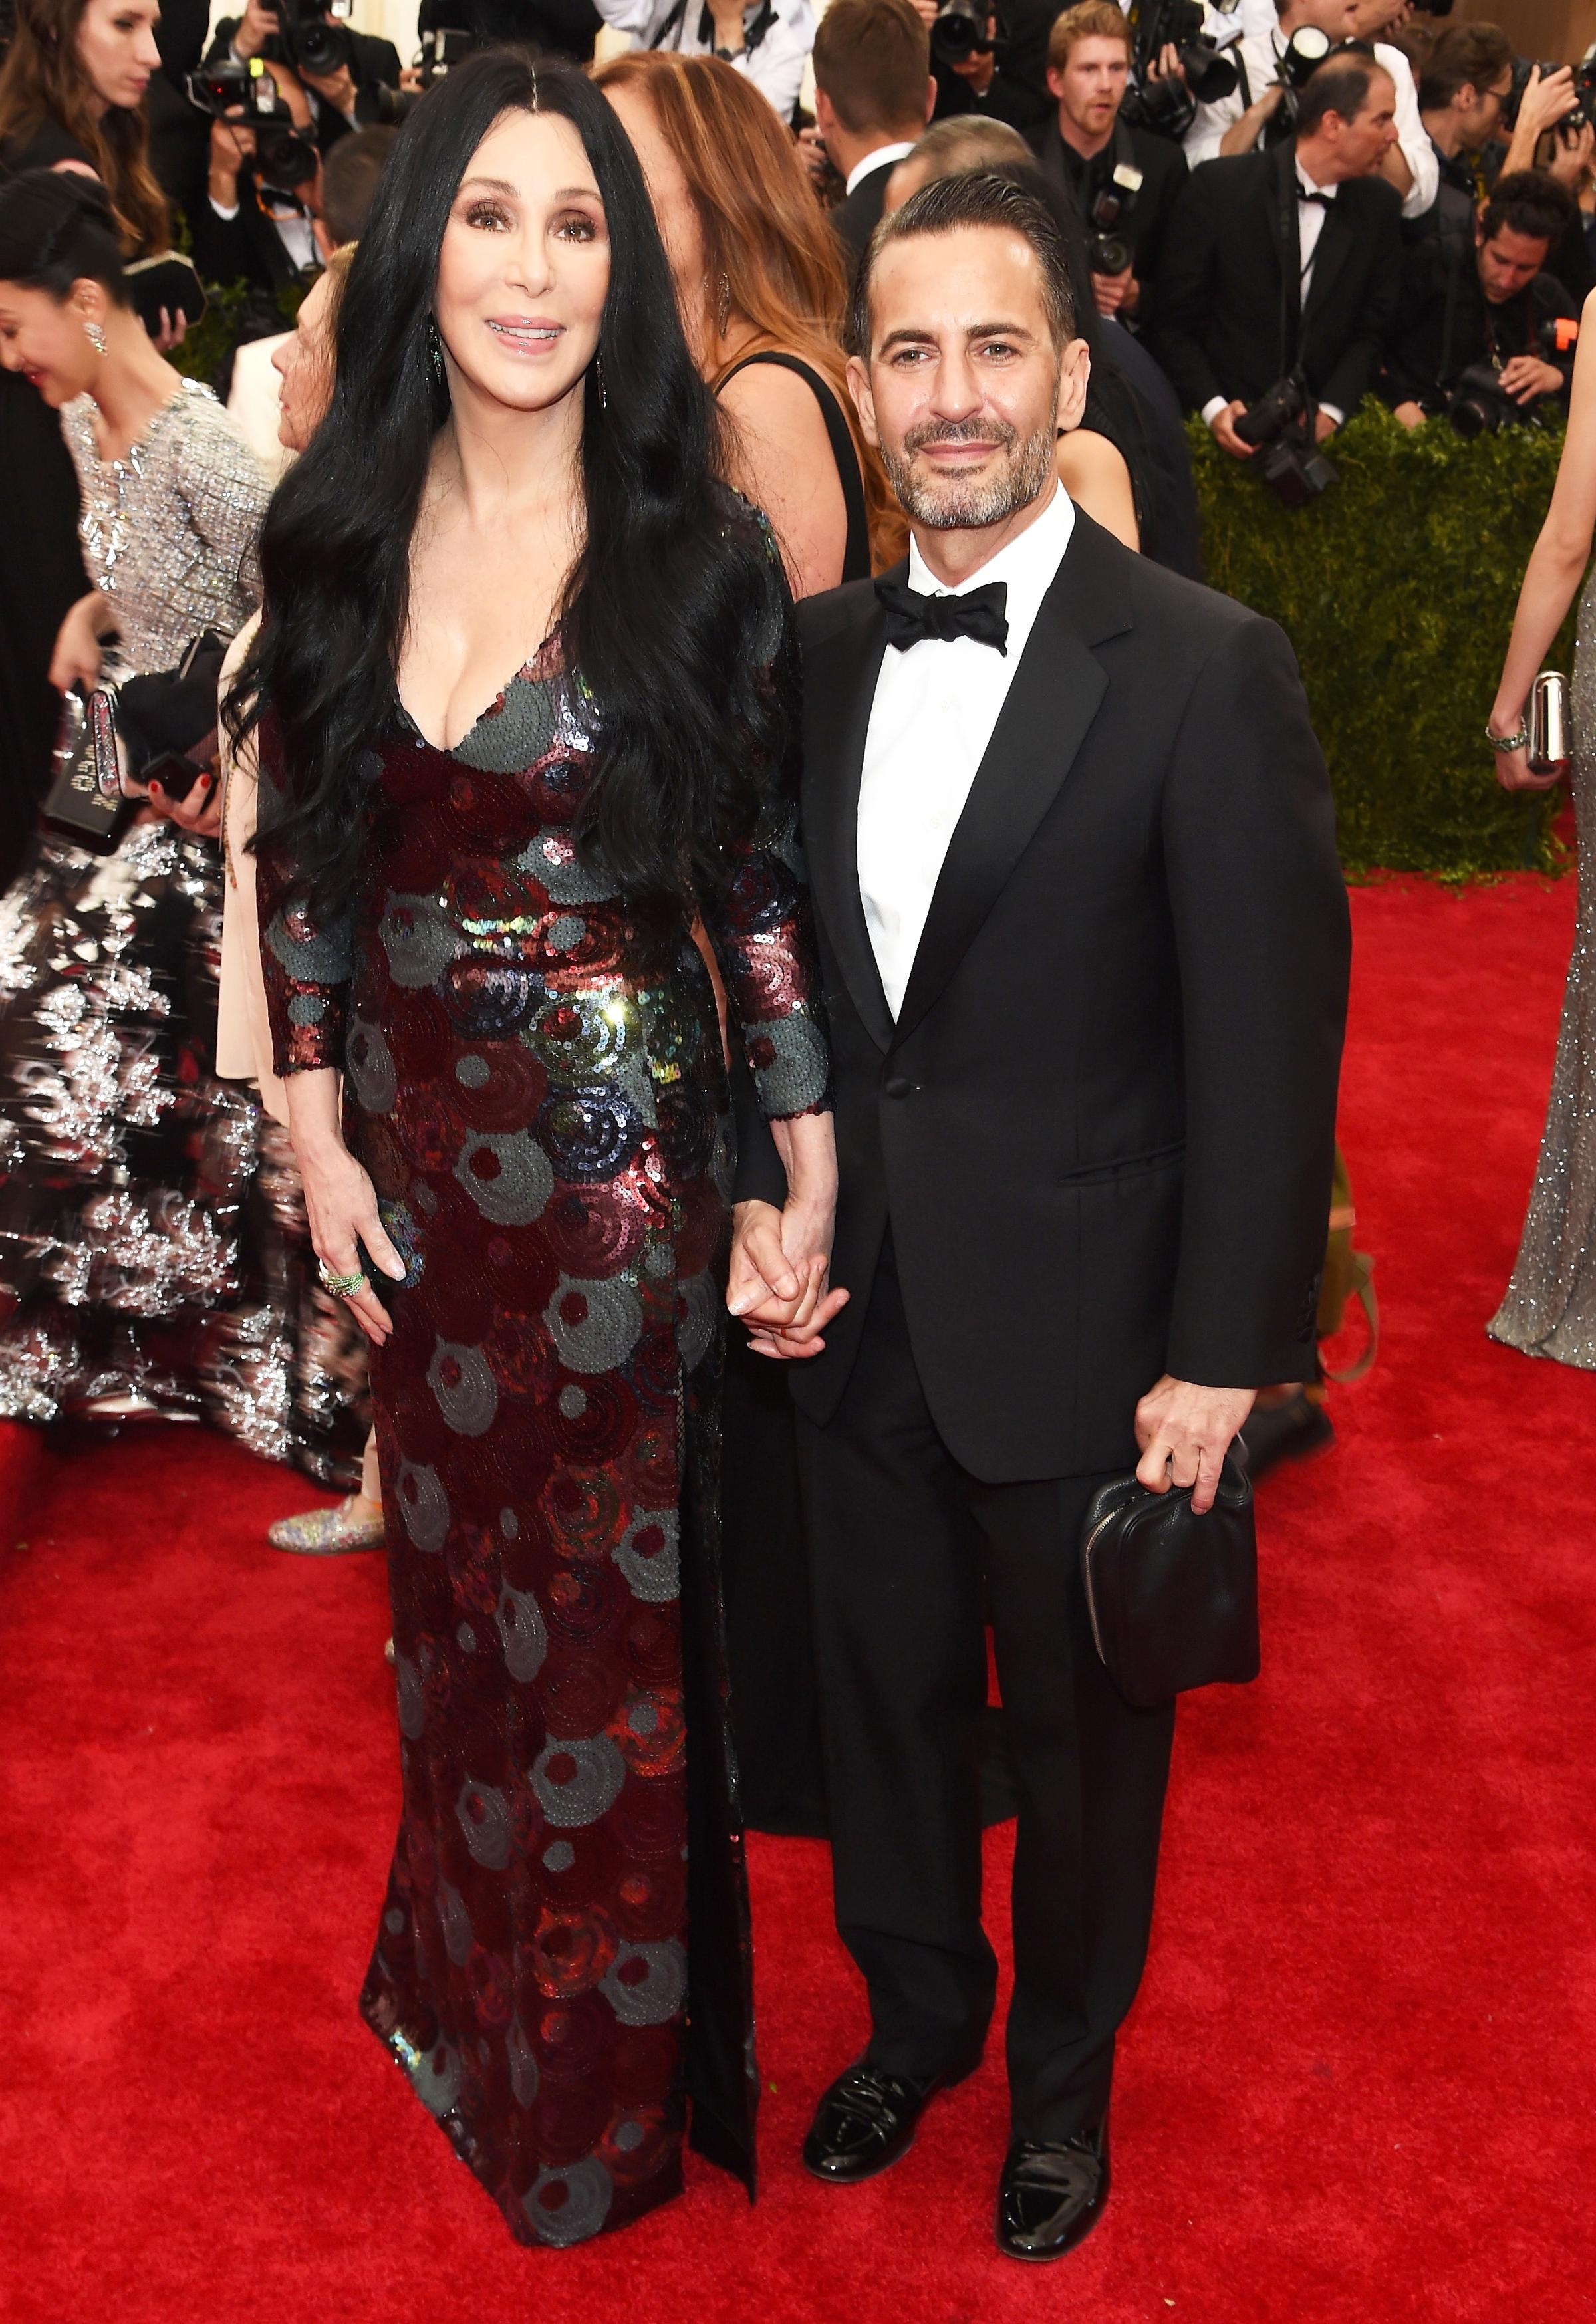 Cher and designer Marc Jacobs attend the Metropolitan Museum's Costume Institute Gala in New York City on May 4, 2015.